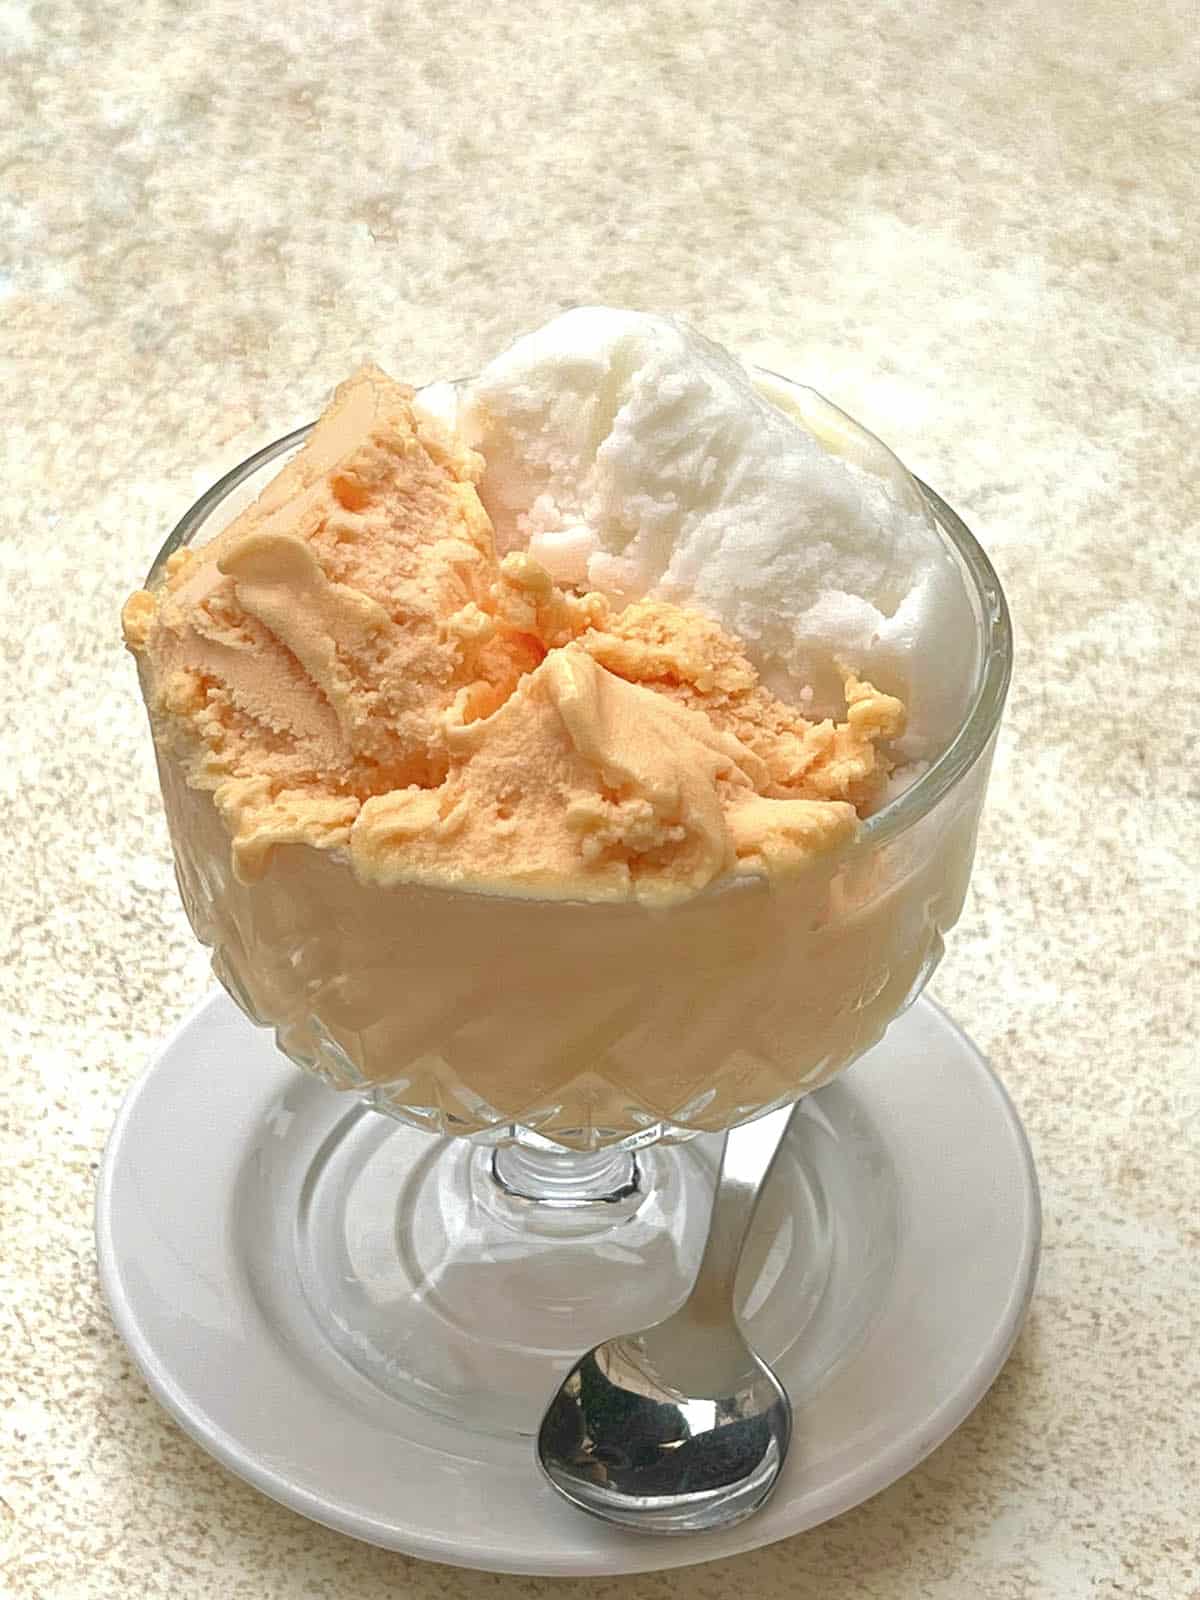 An image of a glass dessert cup filled with madarin and lemon gelato from Caffè Costanzo 